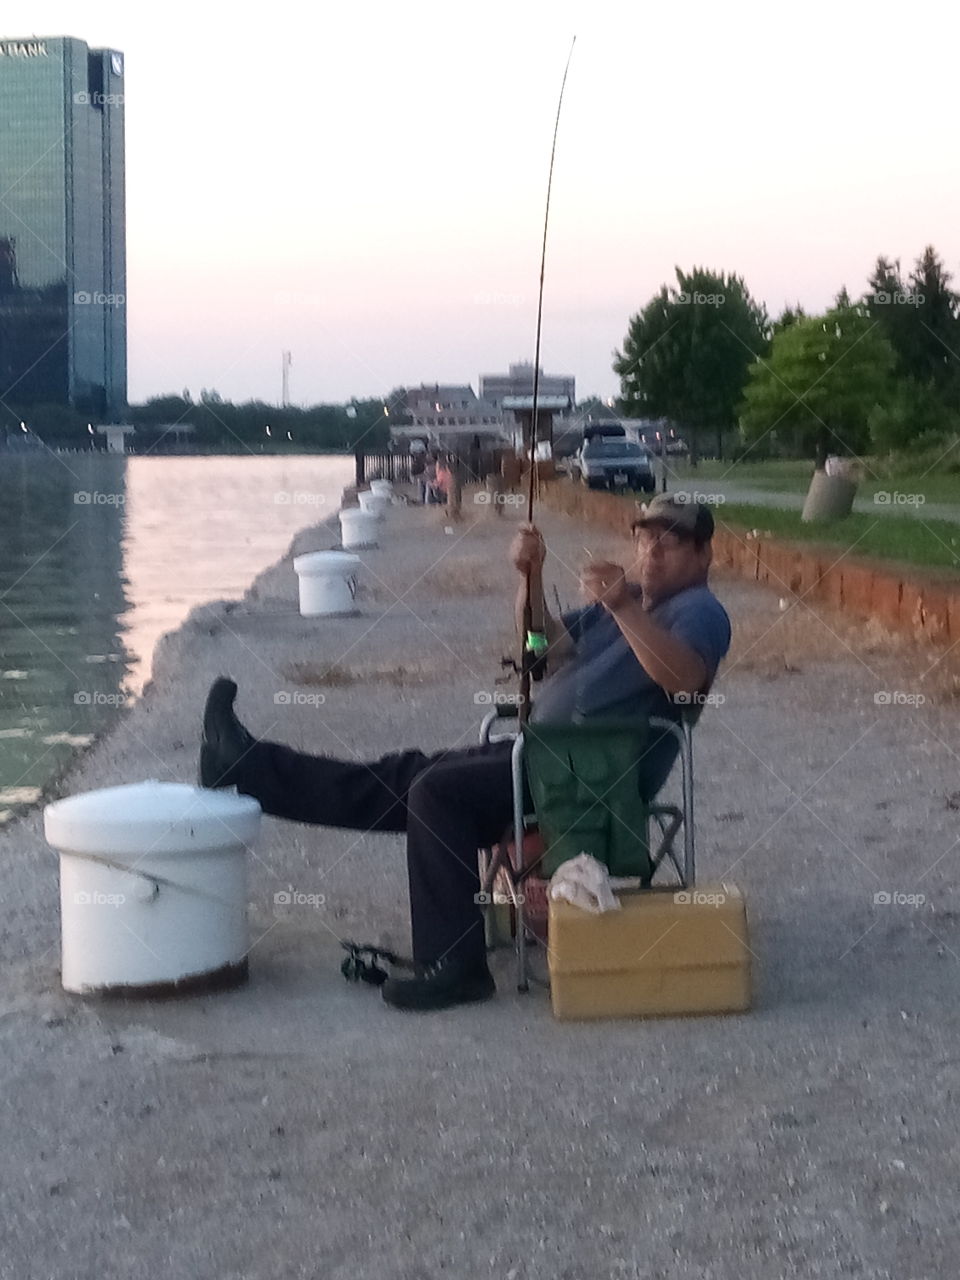 Fishing trip to downtown Toledo Ohio,on the Maumee River.